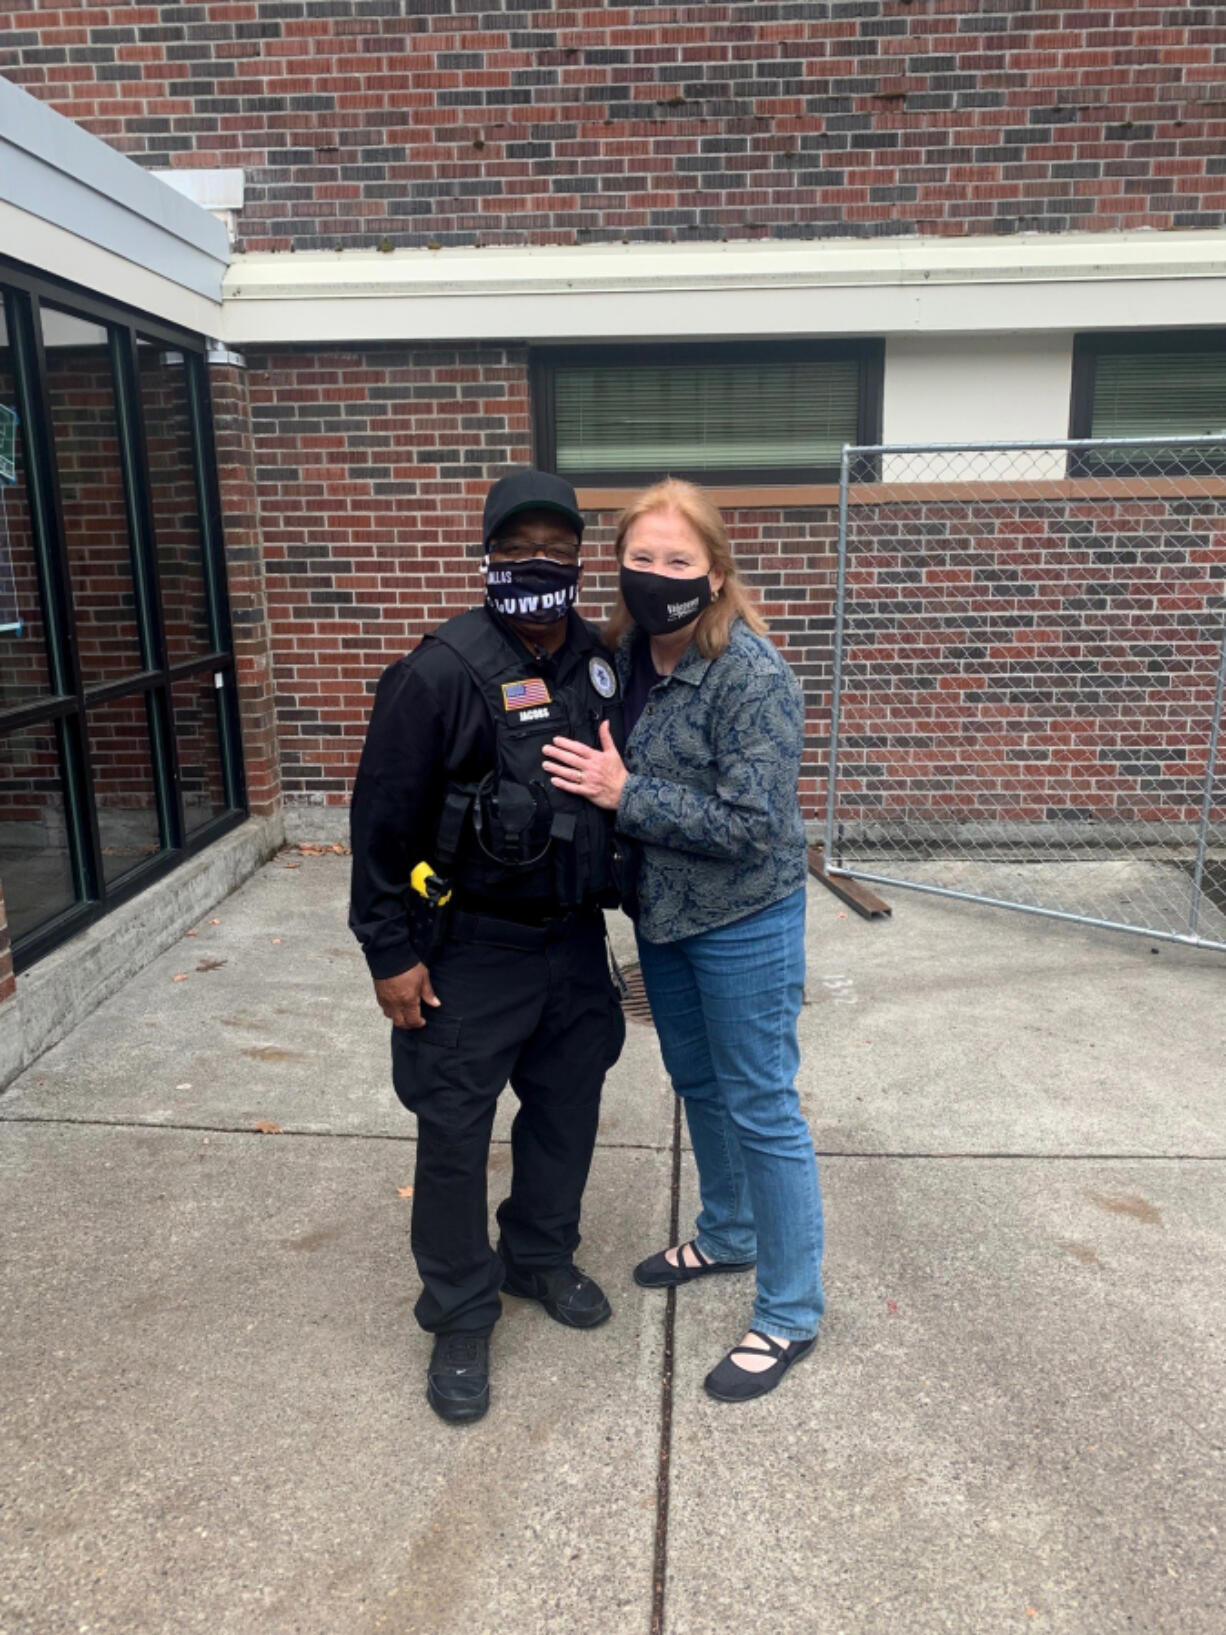 Vancouver Mayor Anne McEnerny-Ogle recently presented Tony Jacobs, a school resource officer at Vancouver School of Arts and Academics, with protein bars that Jacobs has been distributing to students in need for 20 years.